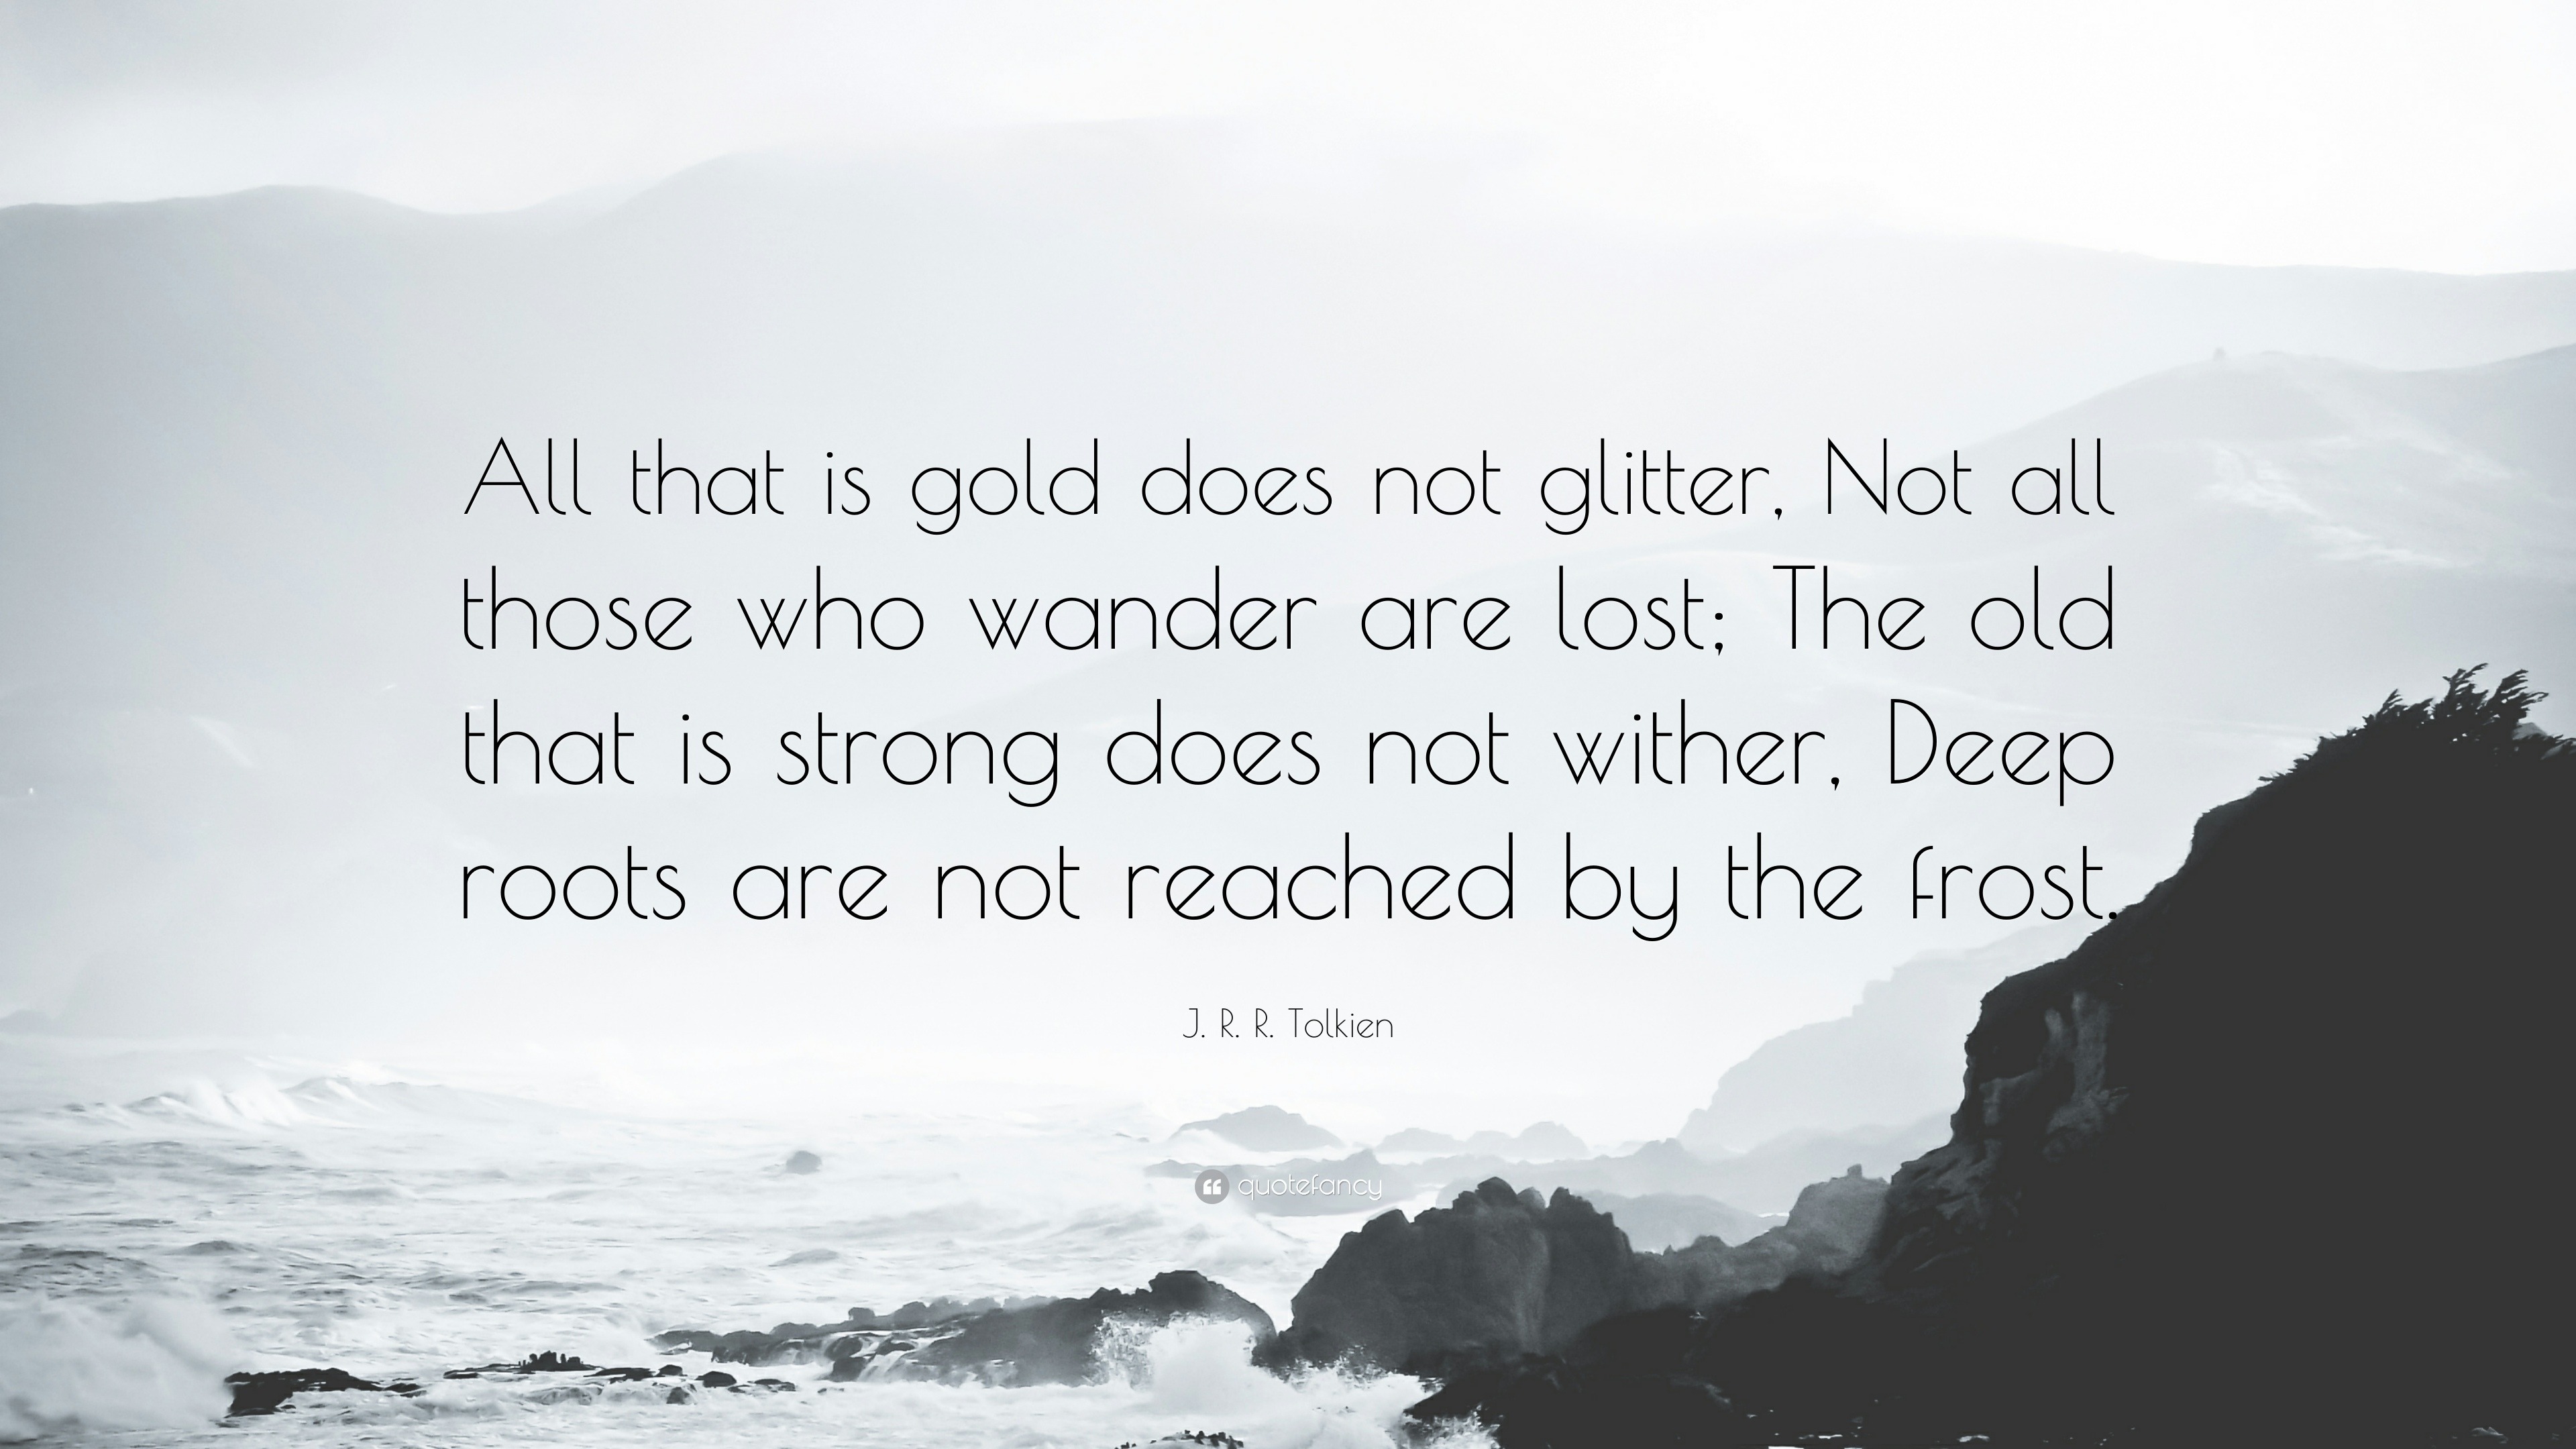 jrr tolkien quotes about god